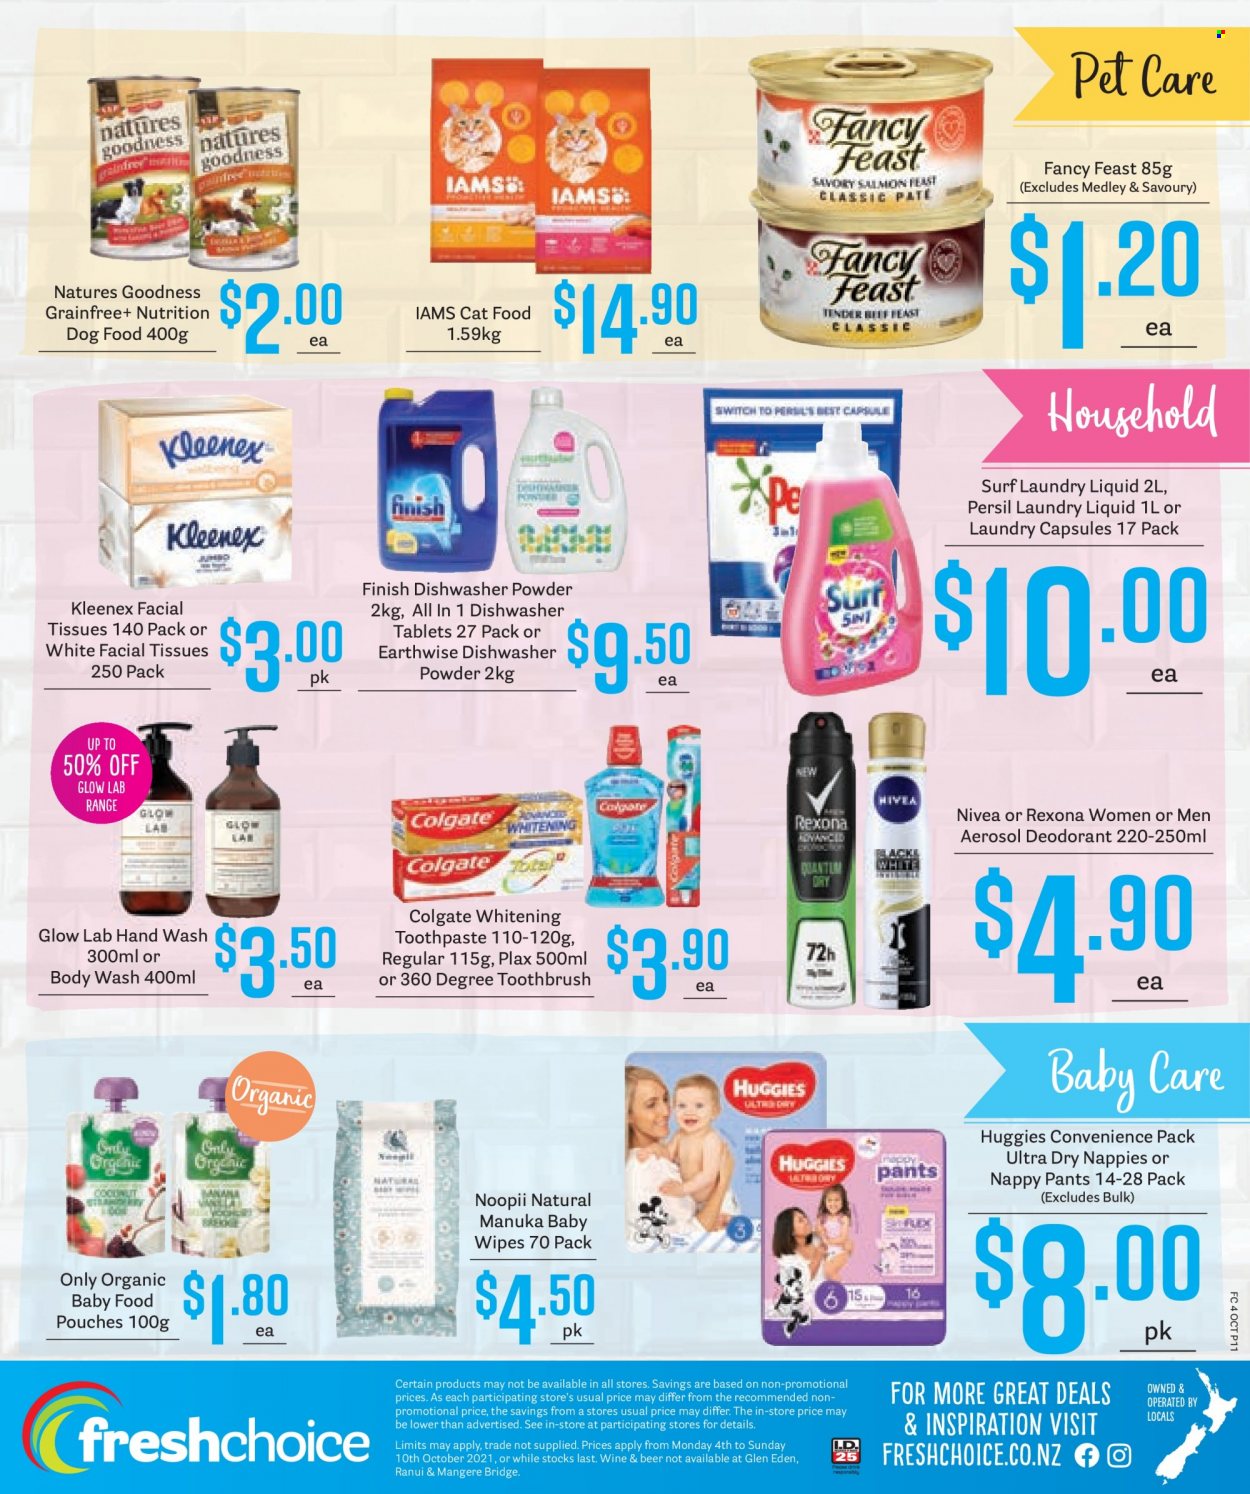 thumbnail - Fresh Choice mailer - 04.10.2021 - 10.10.2021 - Sales products - wine, beer, organic baby food, wipes, Huggies, pants, baby wipes, nappies, Nivea, Kleenex, tissues, Persil, laundry detergent, laundry capsules, Surf, dishwasher cleaner, dishwasher tablets, body wash, hand wash, Colgate, toothbrush, toothpaste, Plax, facial tissues, anti-perspirant, Rexona, deodorant, animal food, cat food, dog food, Fancy Feast, Iams. Page 11.